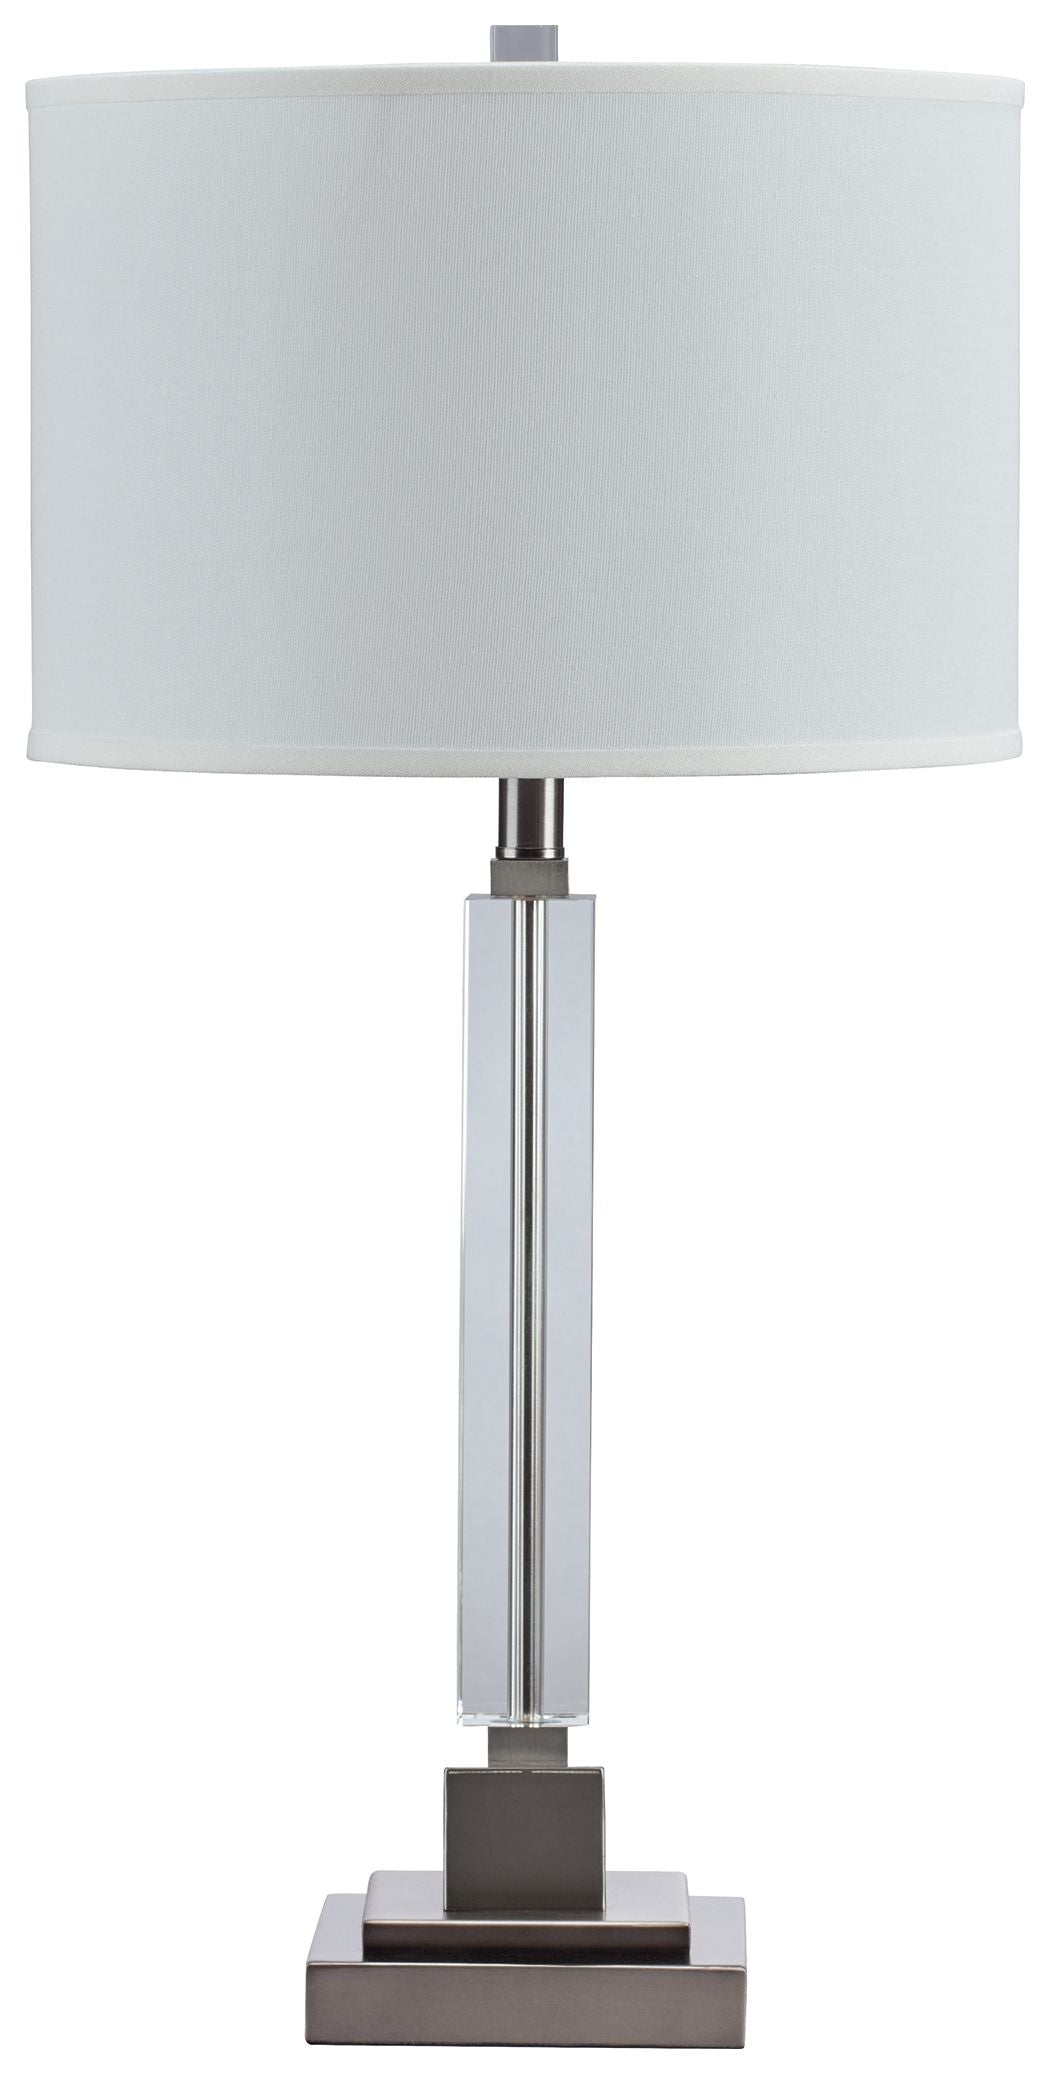 Deccalen - Clear / Silver Finish - Crystal Table Lamp